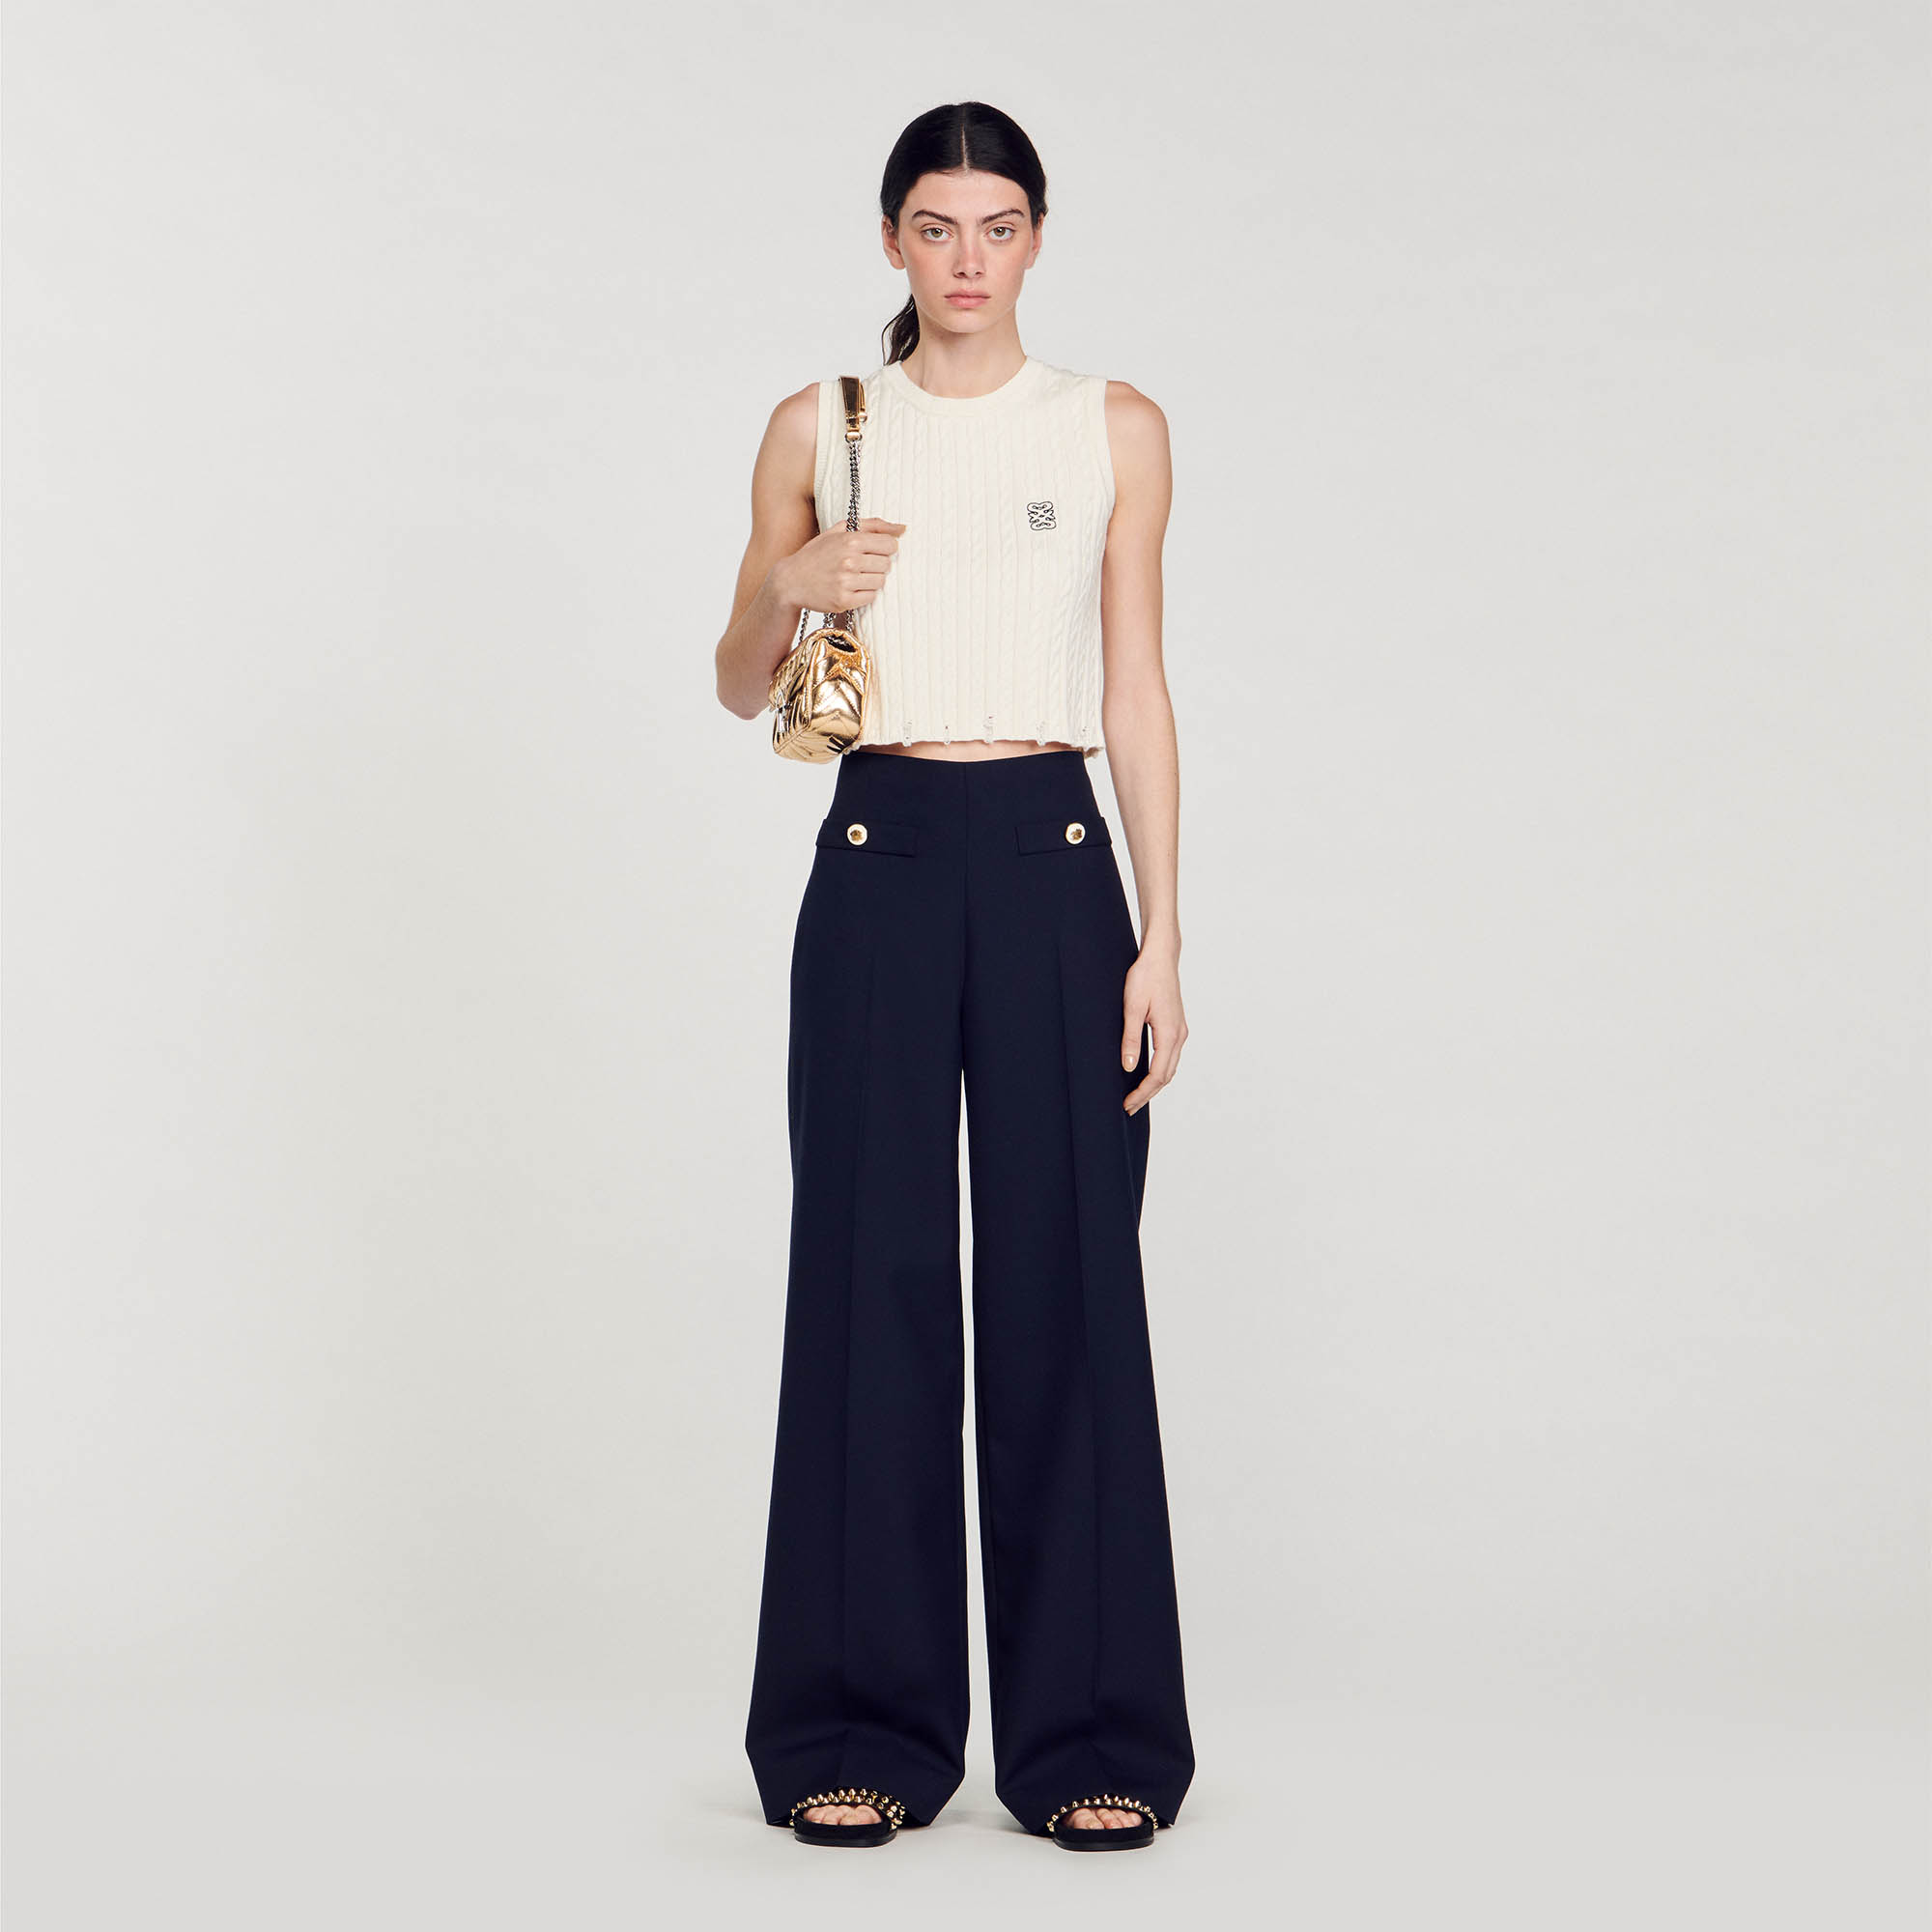 Sandro virgin wool High-waisted, wool-blend twill trousers with flared legs, large welt pockets with decorative button fastenings and ironed creases down the leg